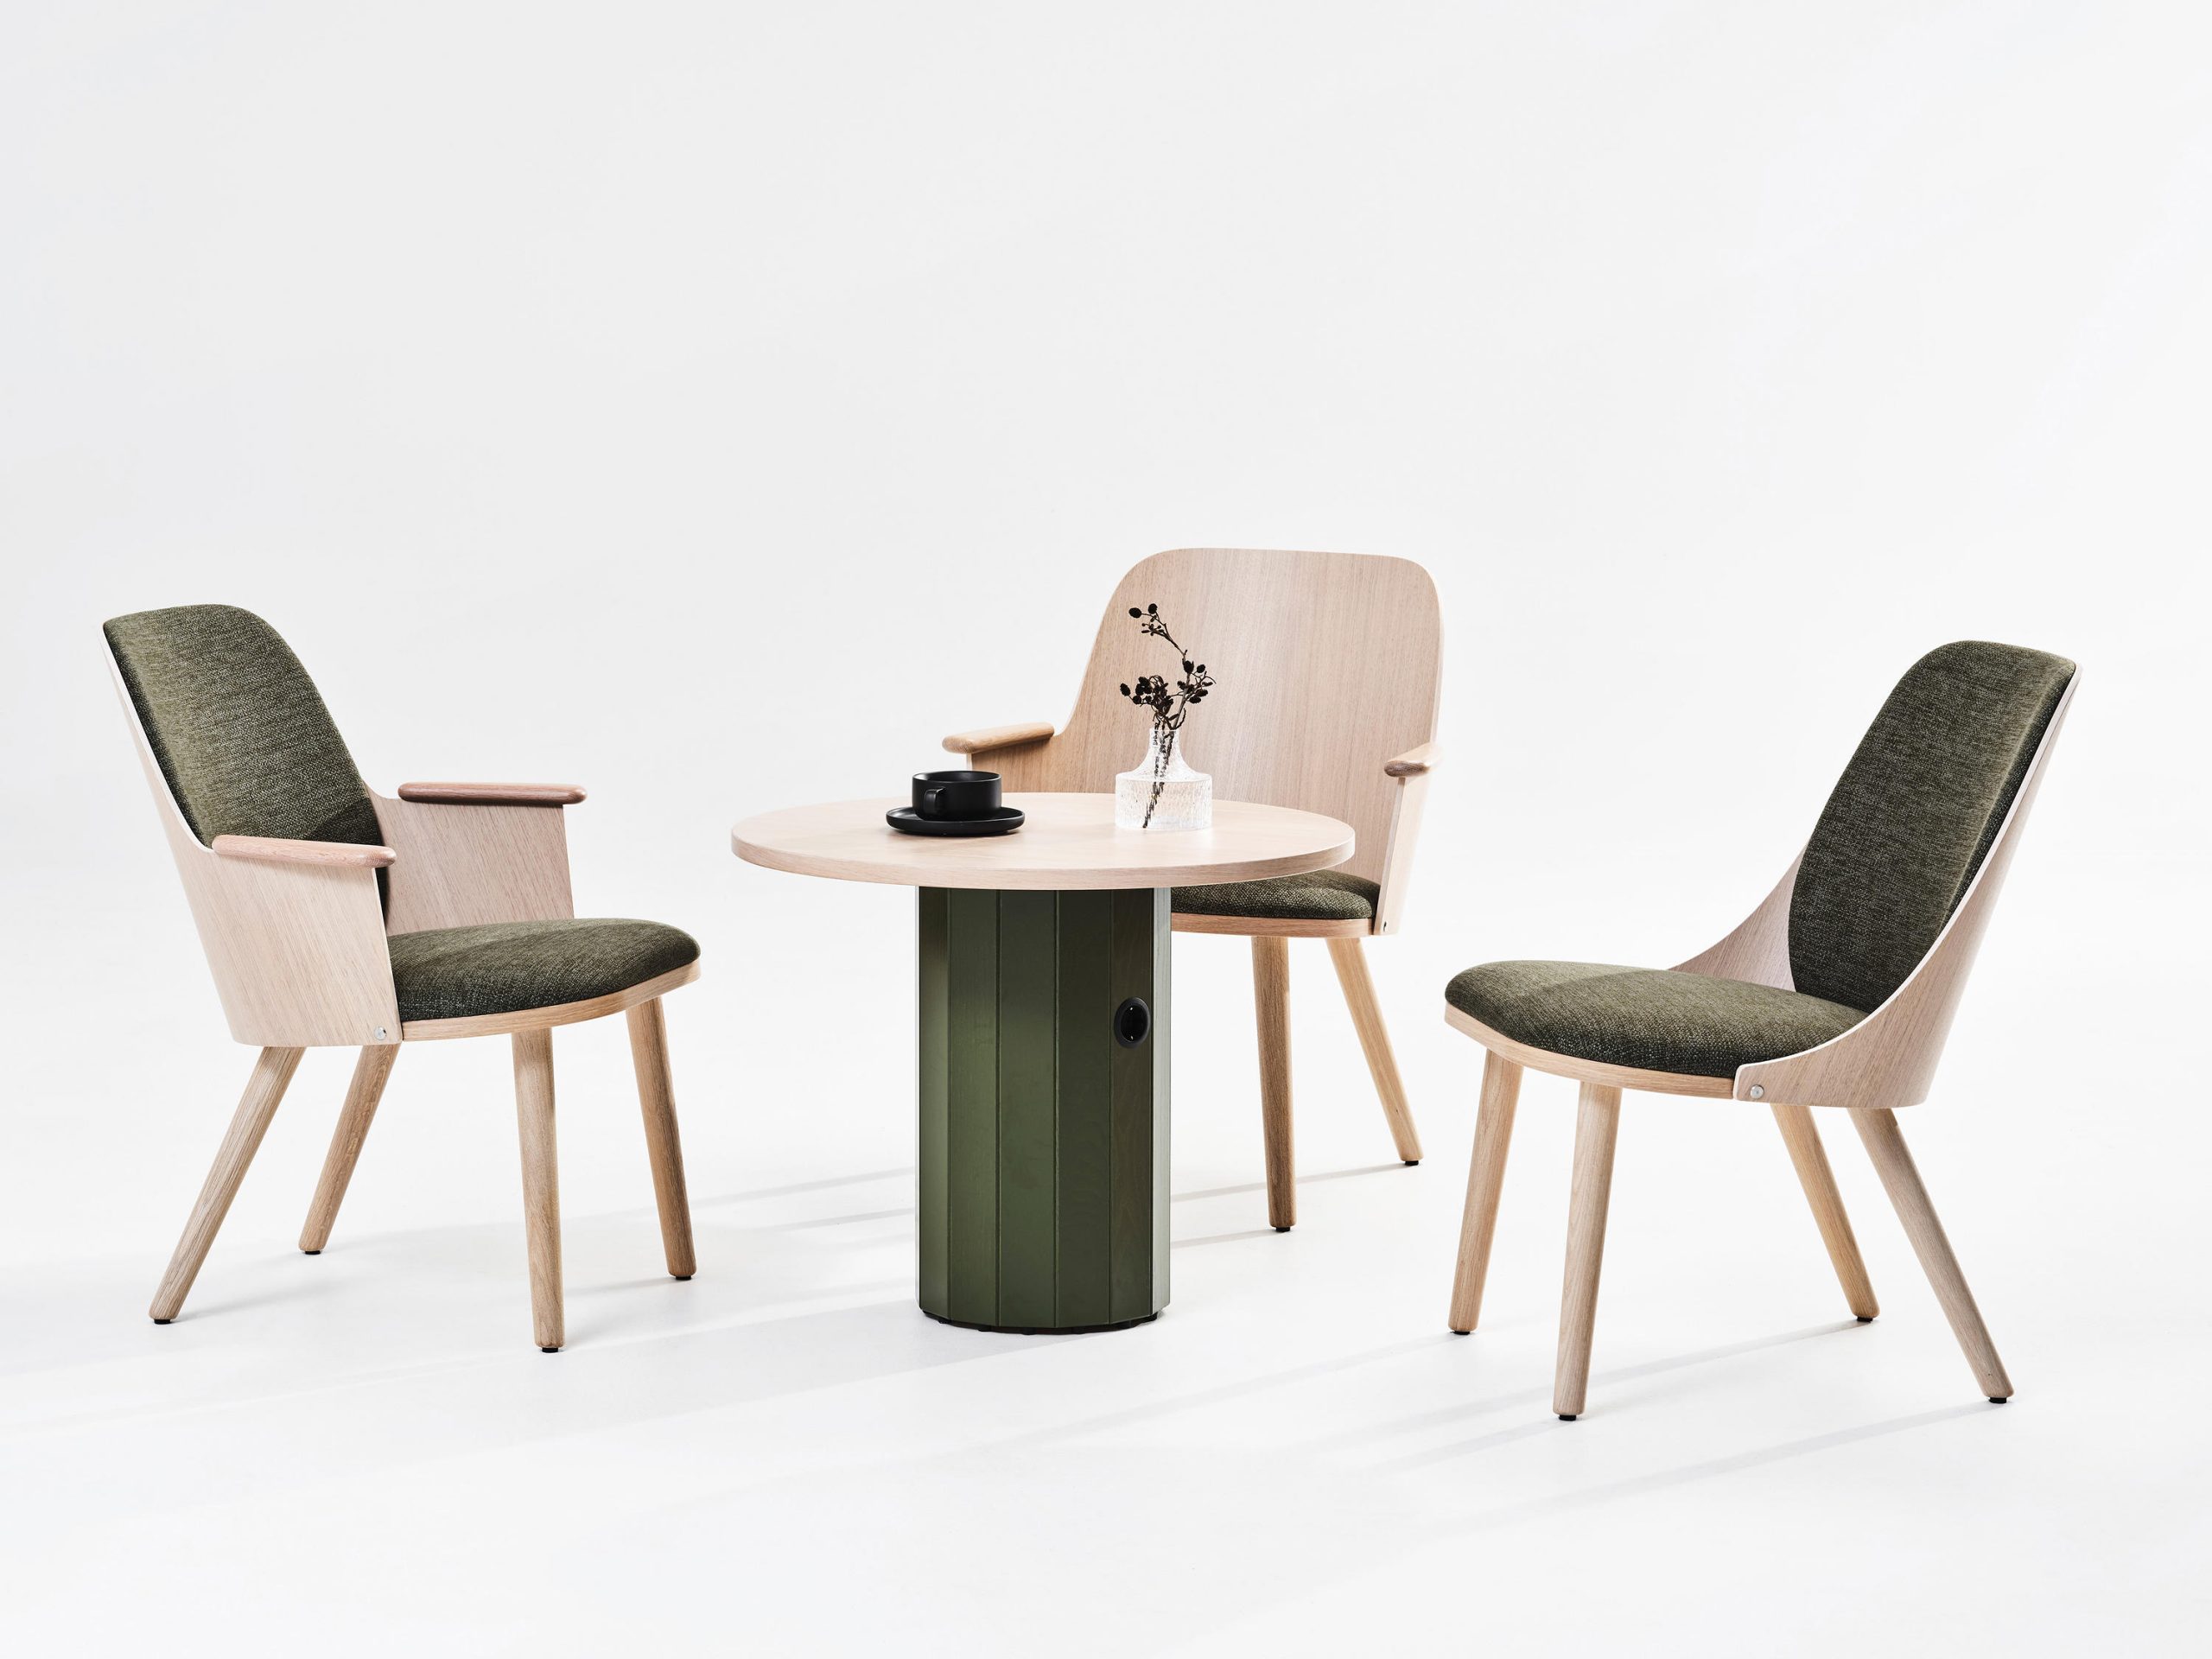 Sander Chair by Roger Persson for Karl Andersson & Söner